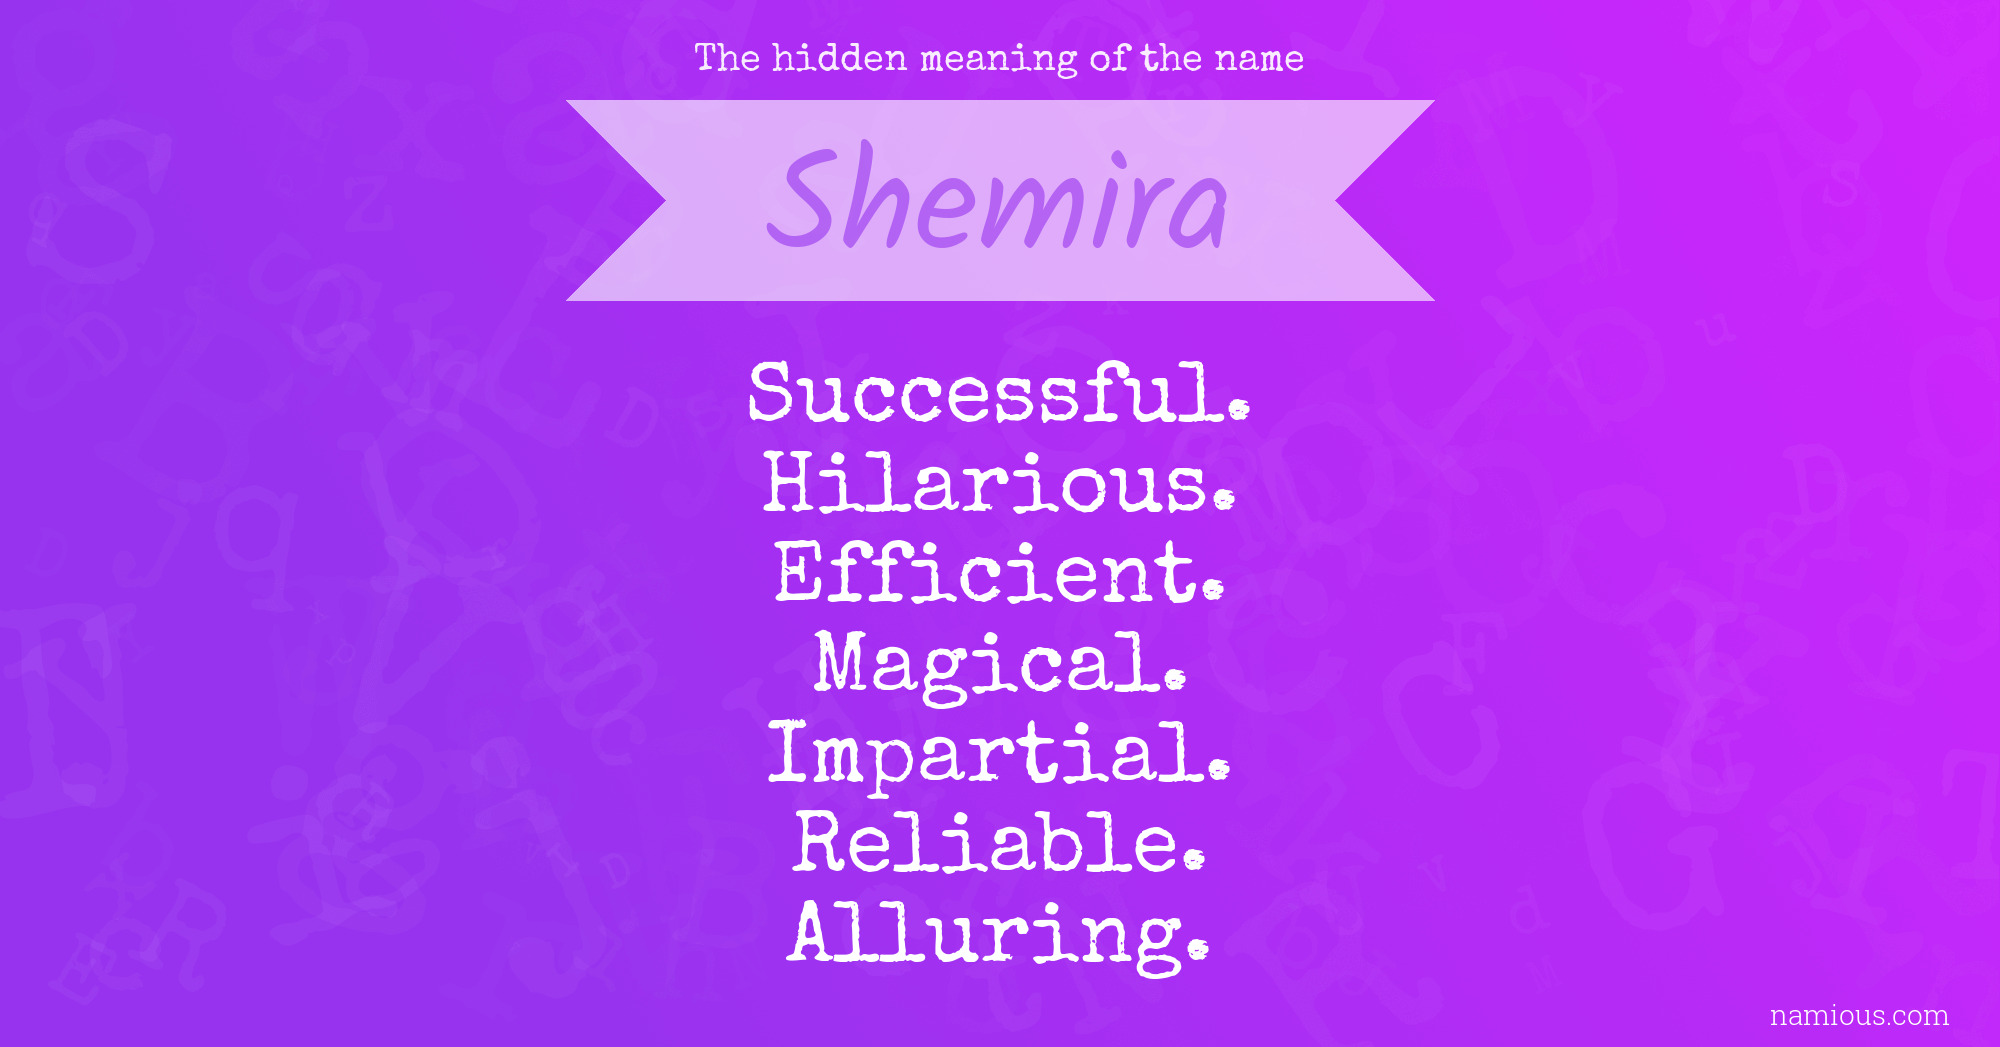 The hidden meaning of the name Shemira